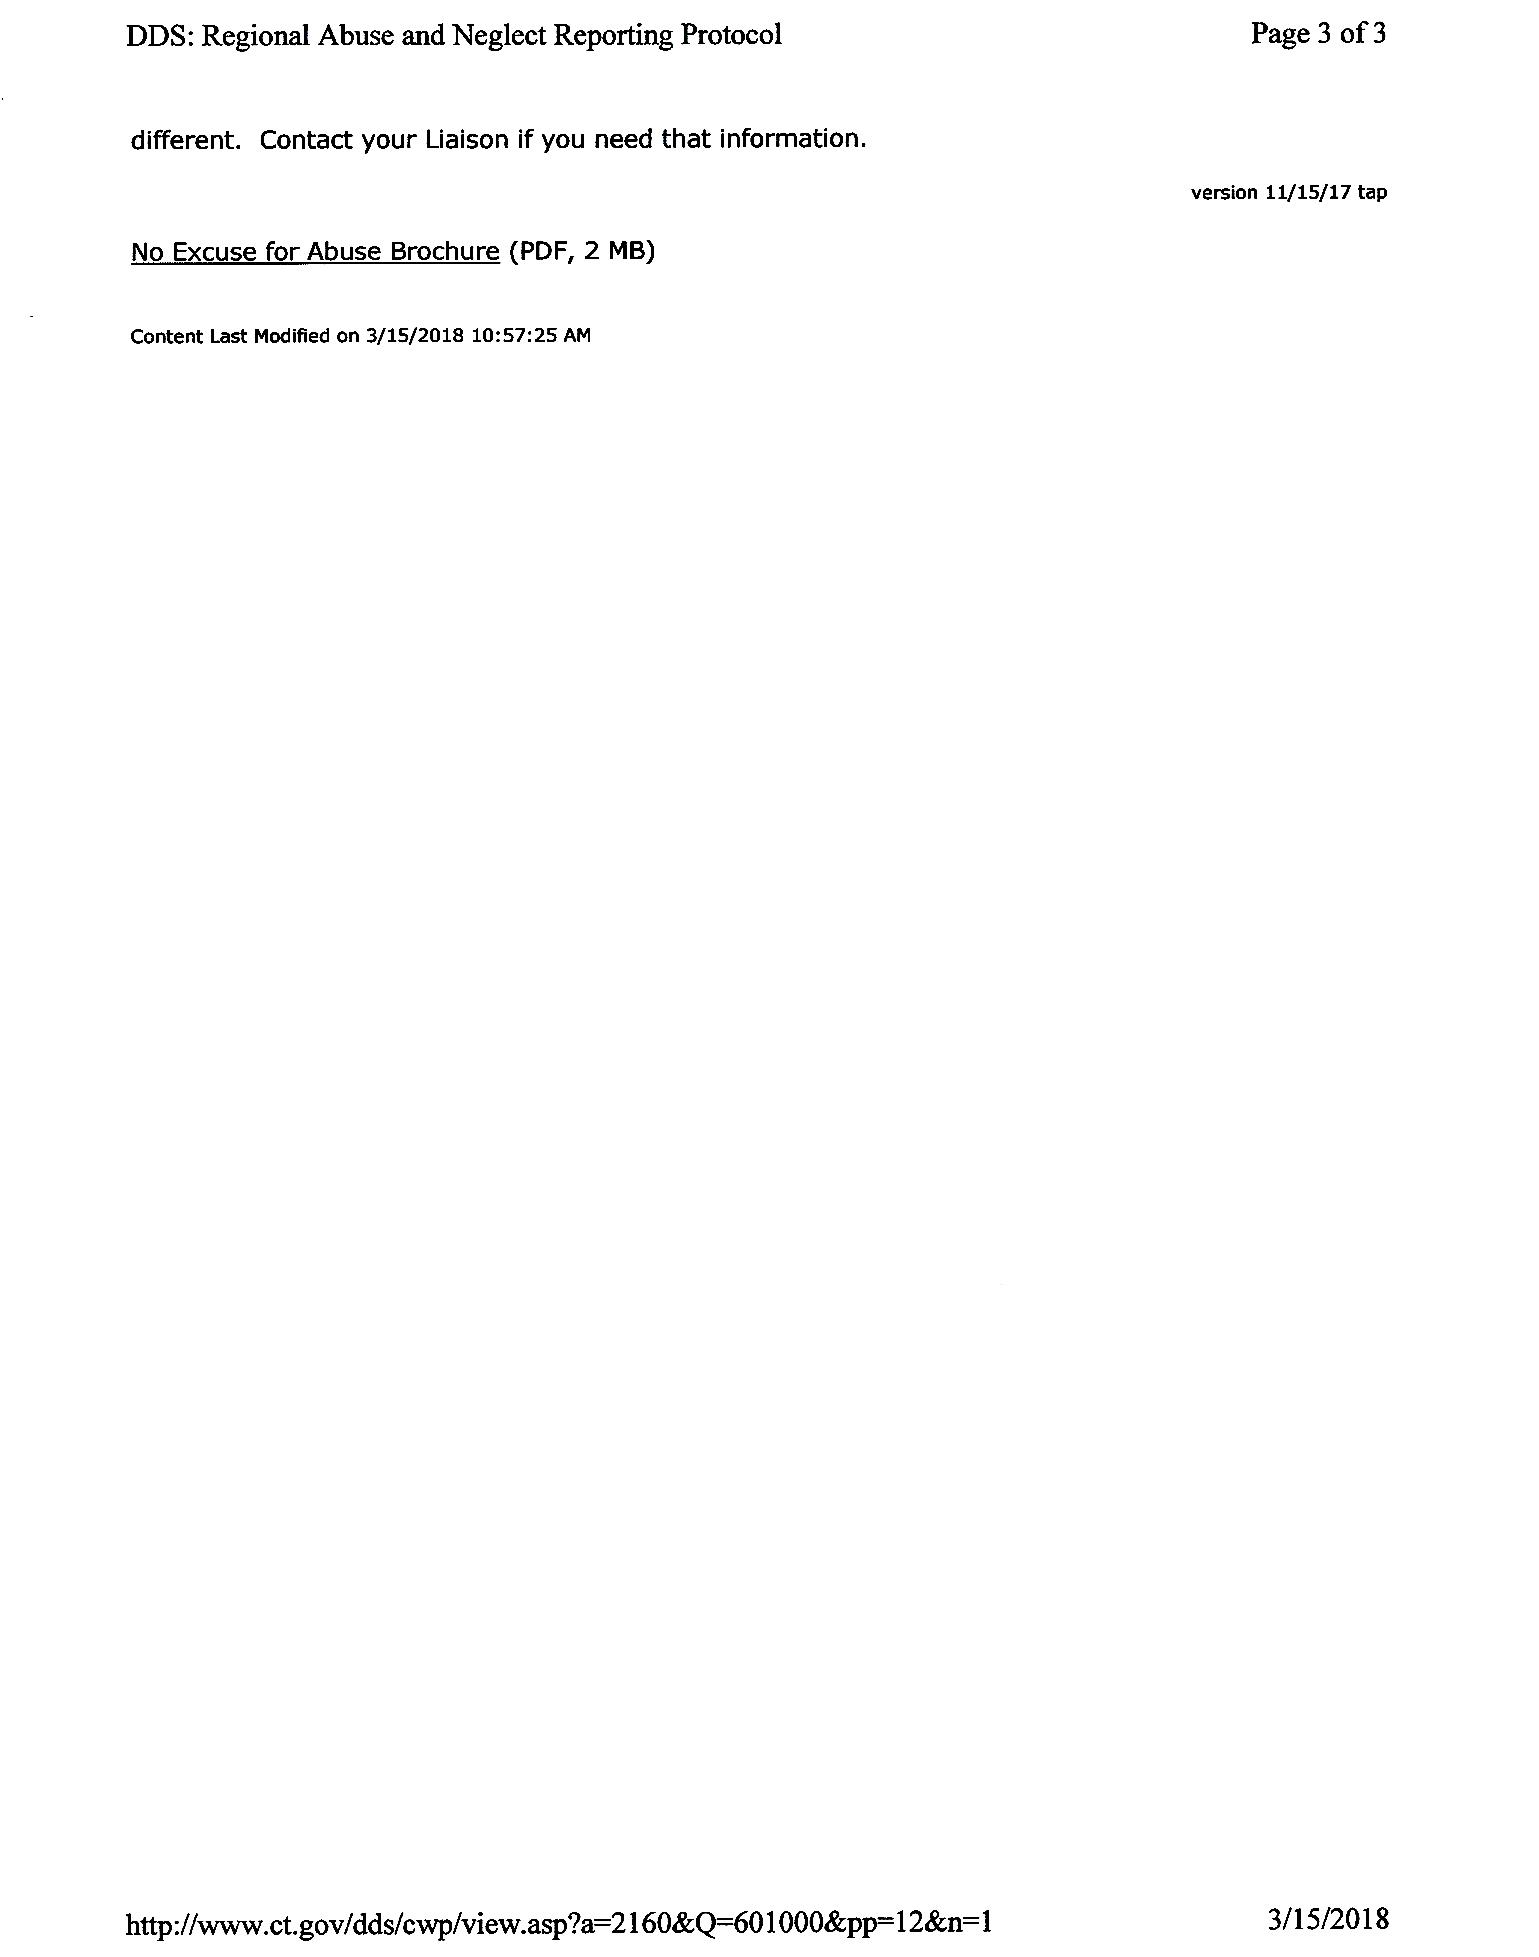 Department of Developmental Services Regional Abuse and Neglect Reporting Protocol - Page 3